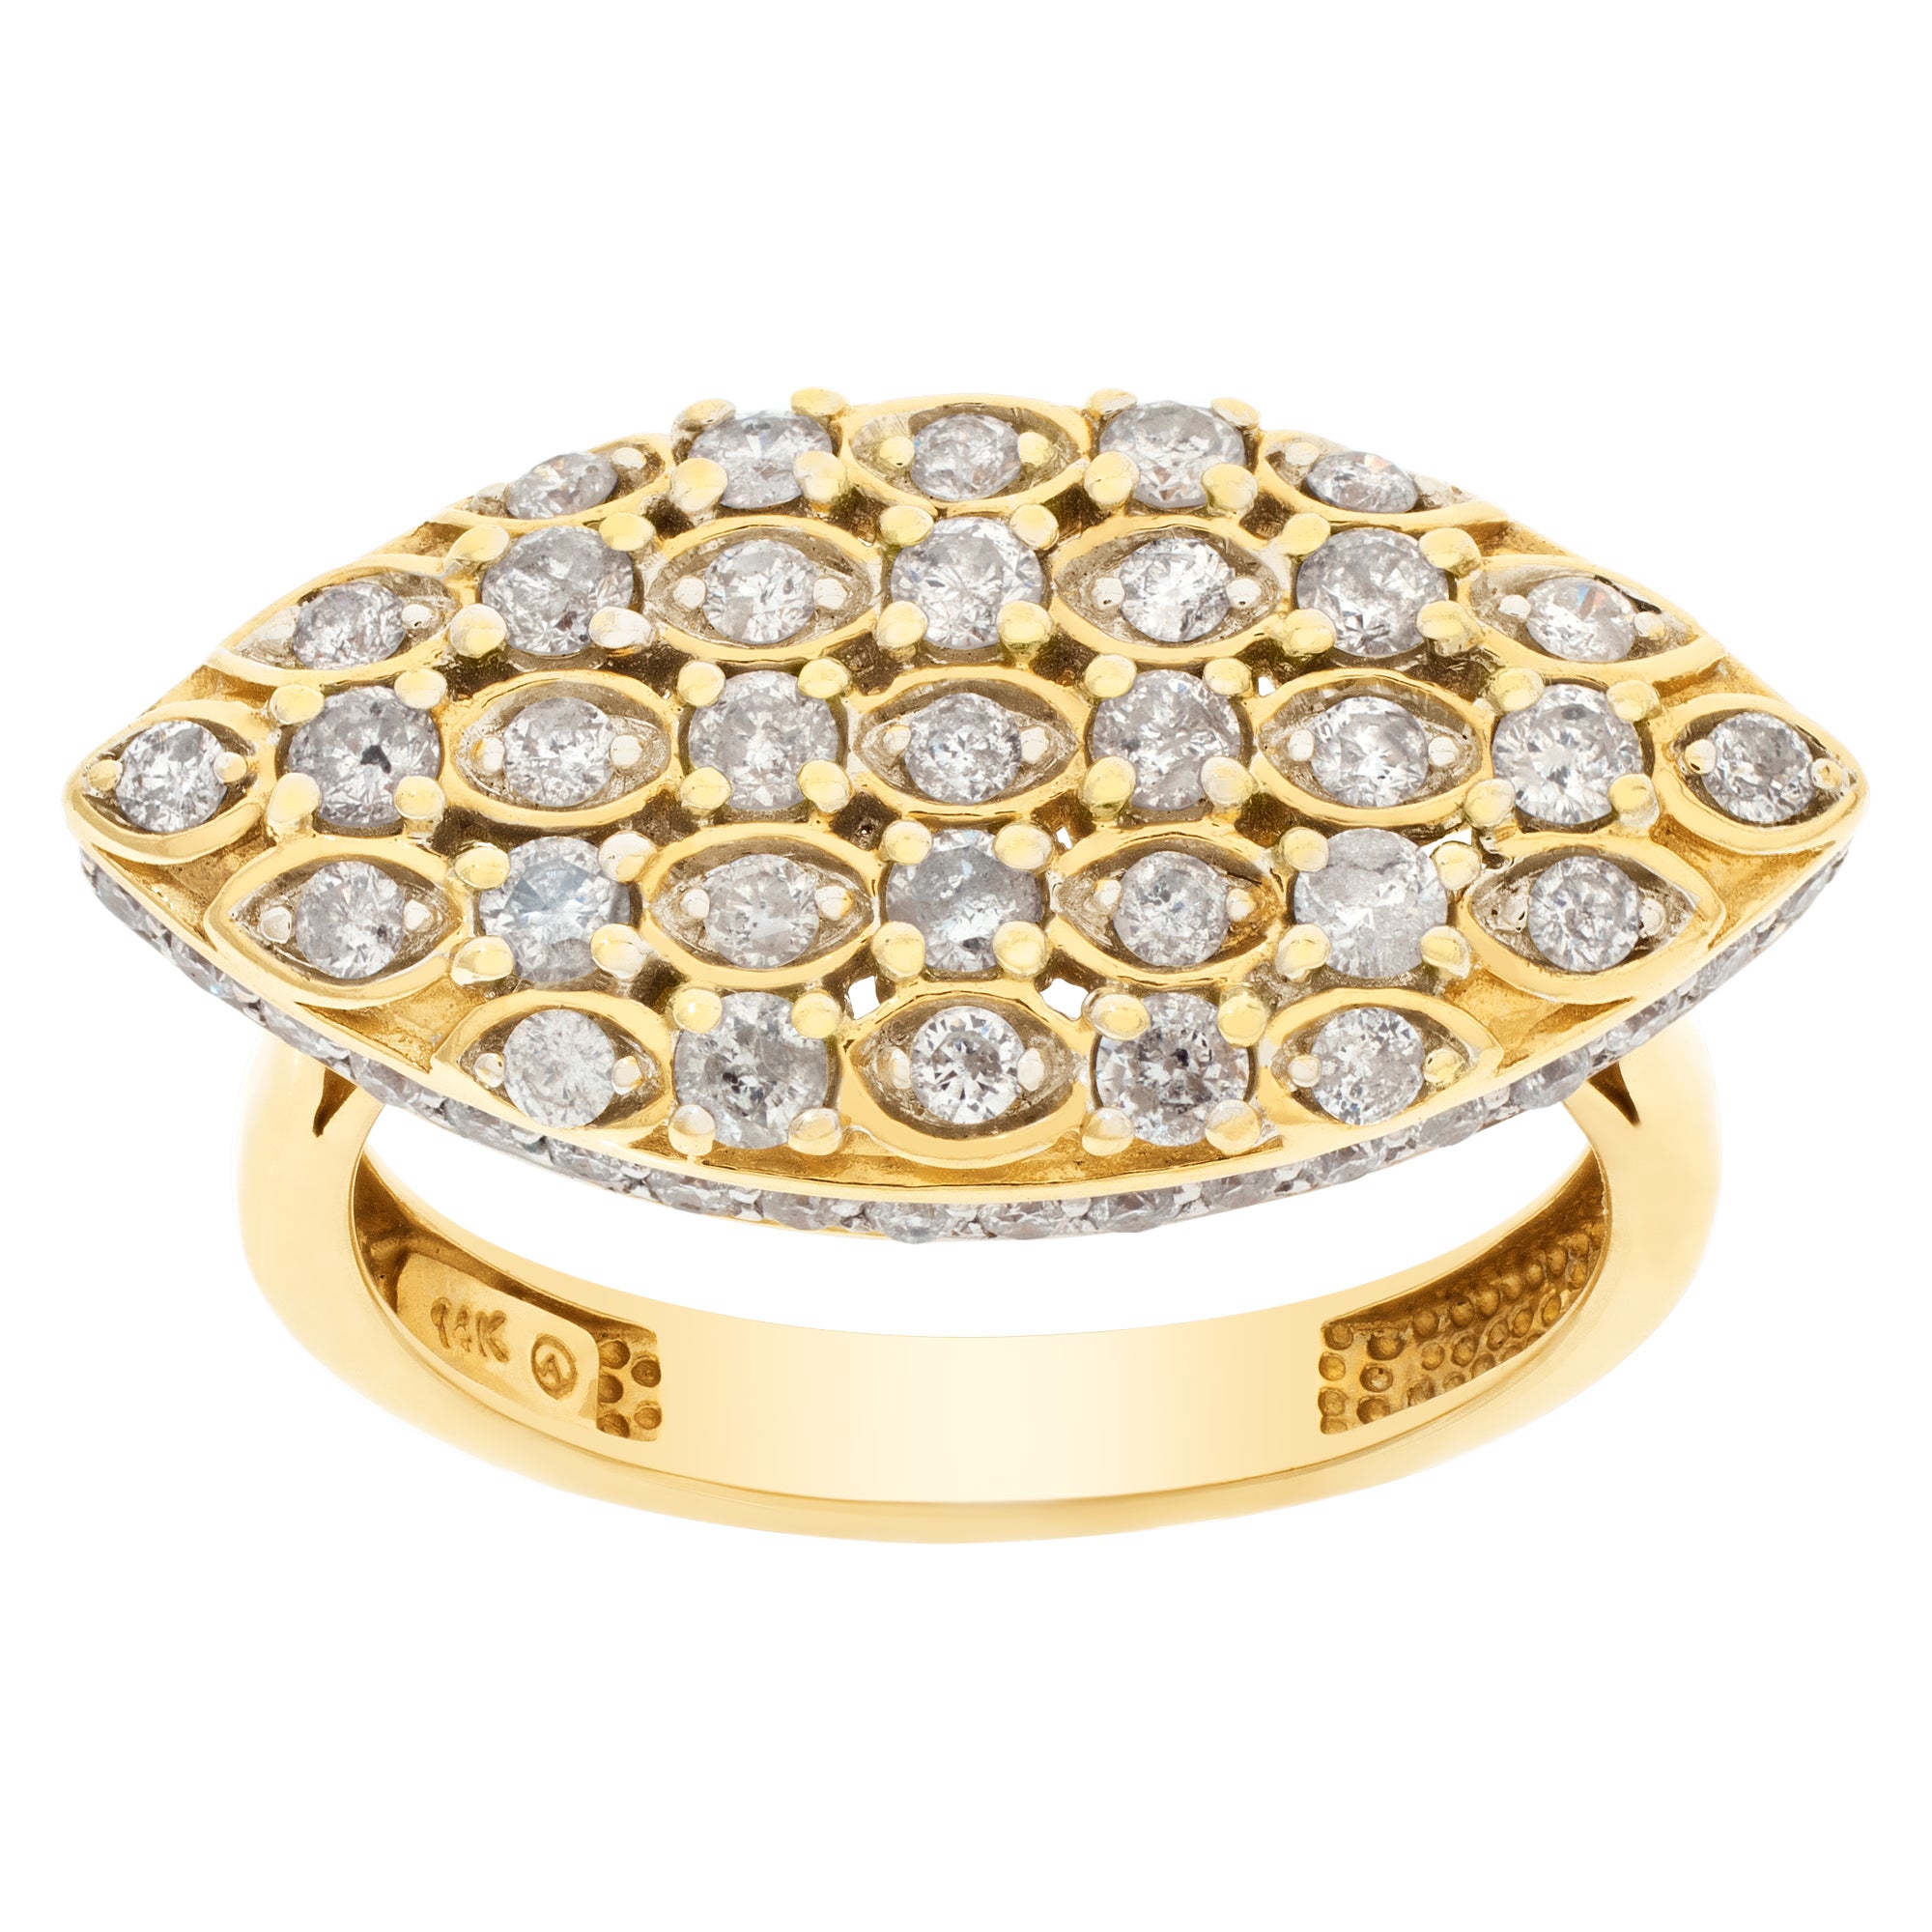 Oval Diamond Ring in 14k Yellow Gold, 0.93 Carats in Pave Set Diamonds For Sale